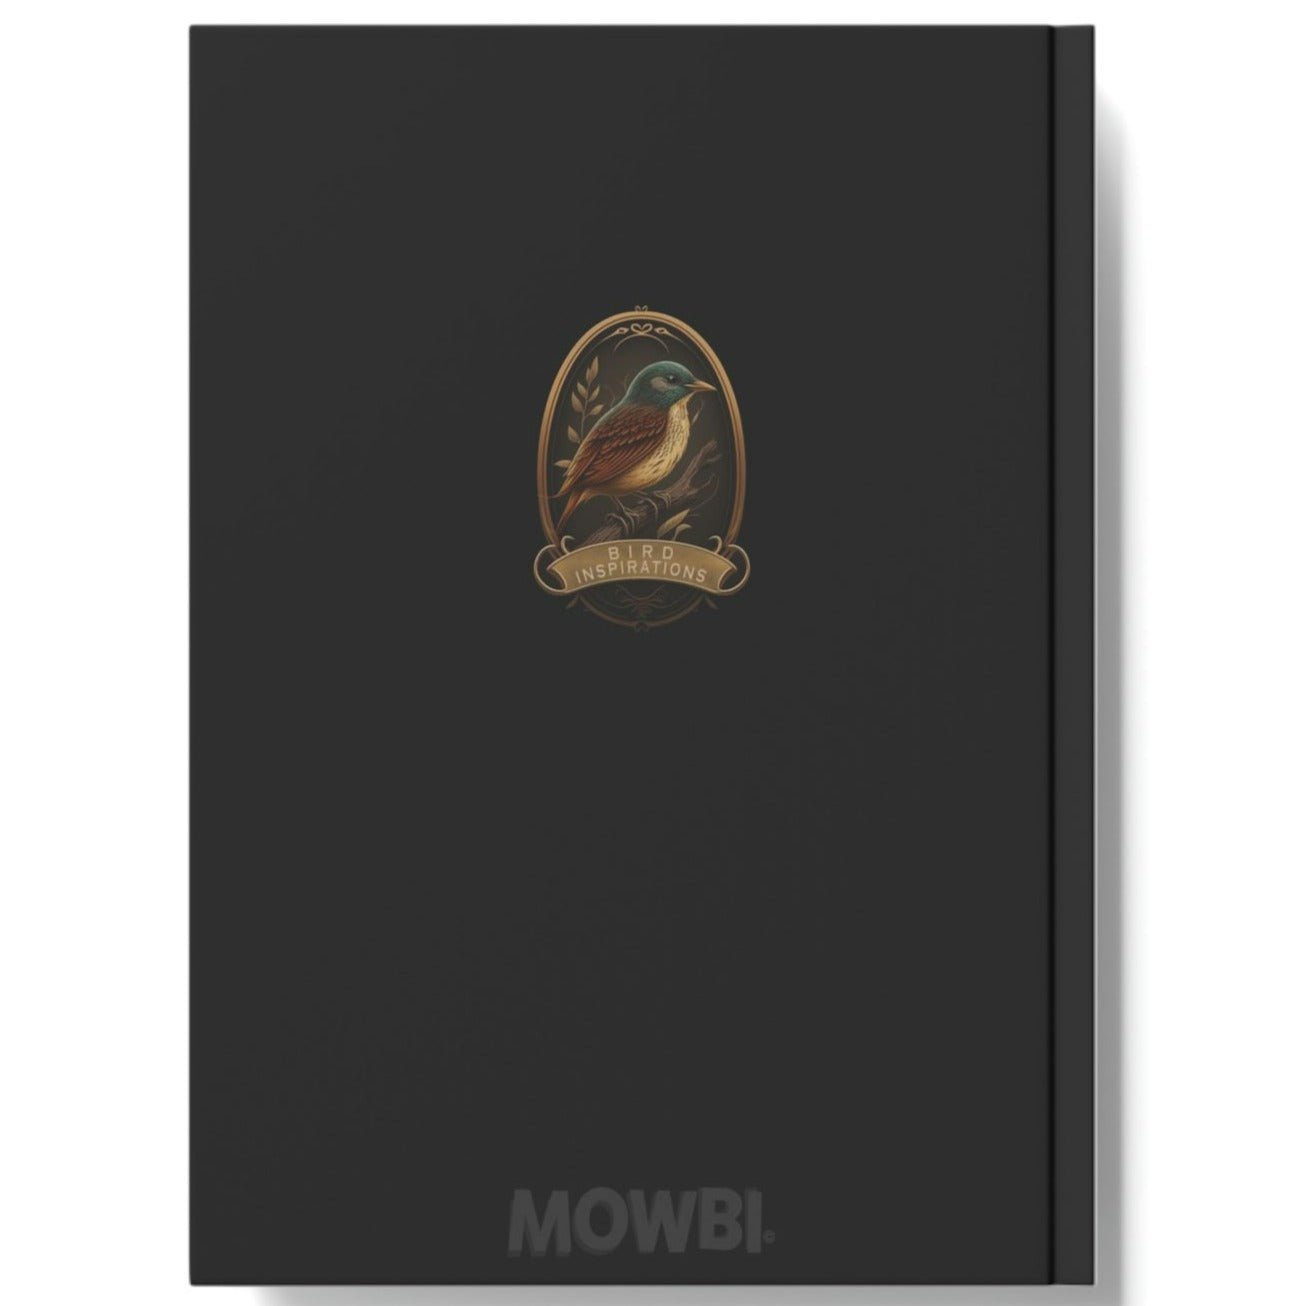 Raven Notebook - Two Ravens on the Hilt of a Sword - Hard Backed Journal